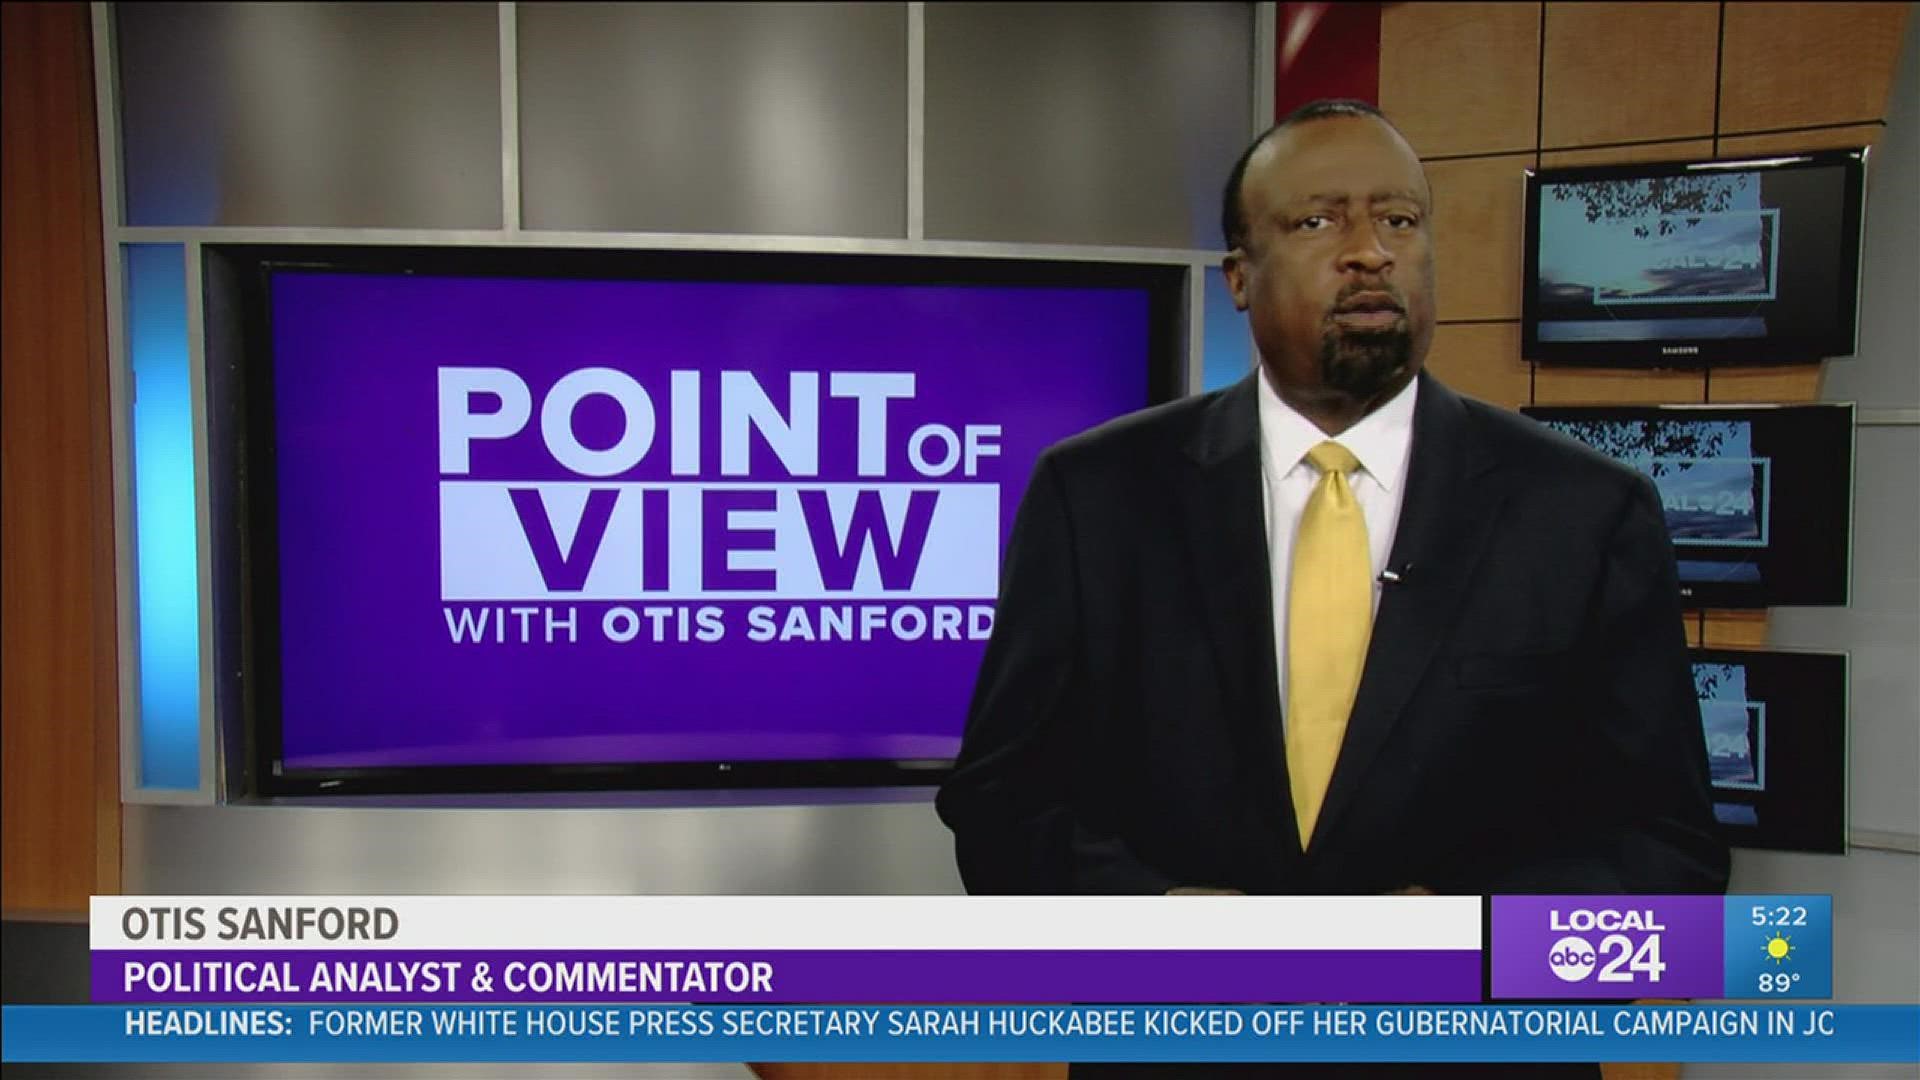 Political analyst and commentator Otis Sanford shared his point of view on the ruling allowing mask mandates in Tennessee Schools.